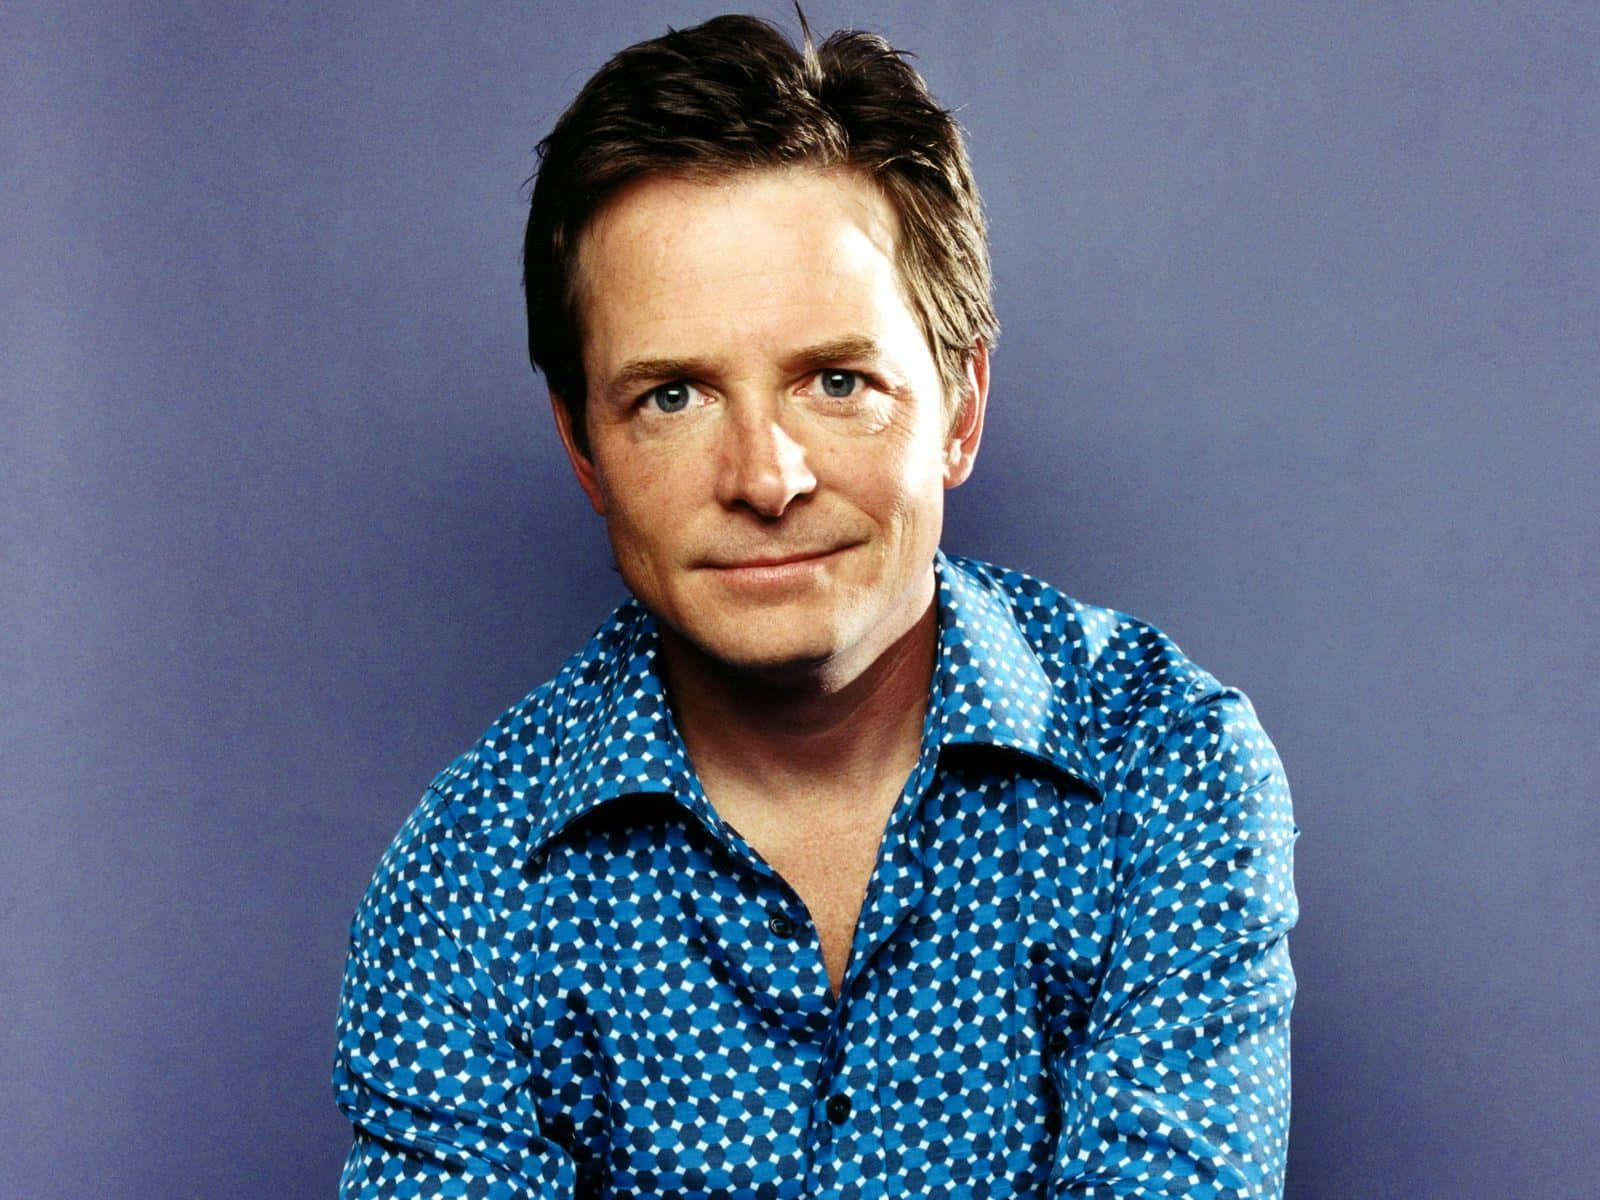 Michael J Fox In His Iconic Role As Marty Mcfly Background